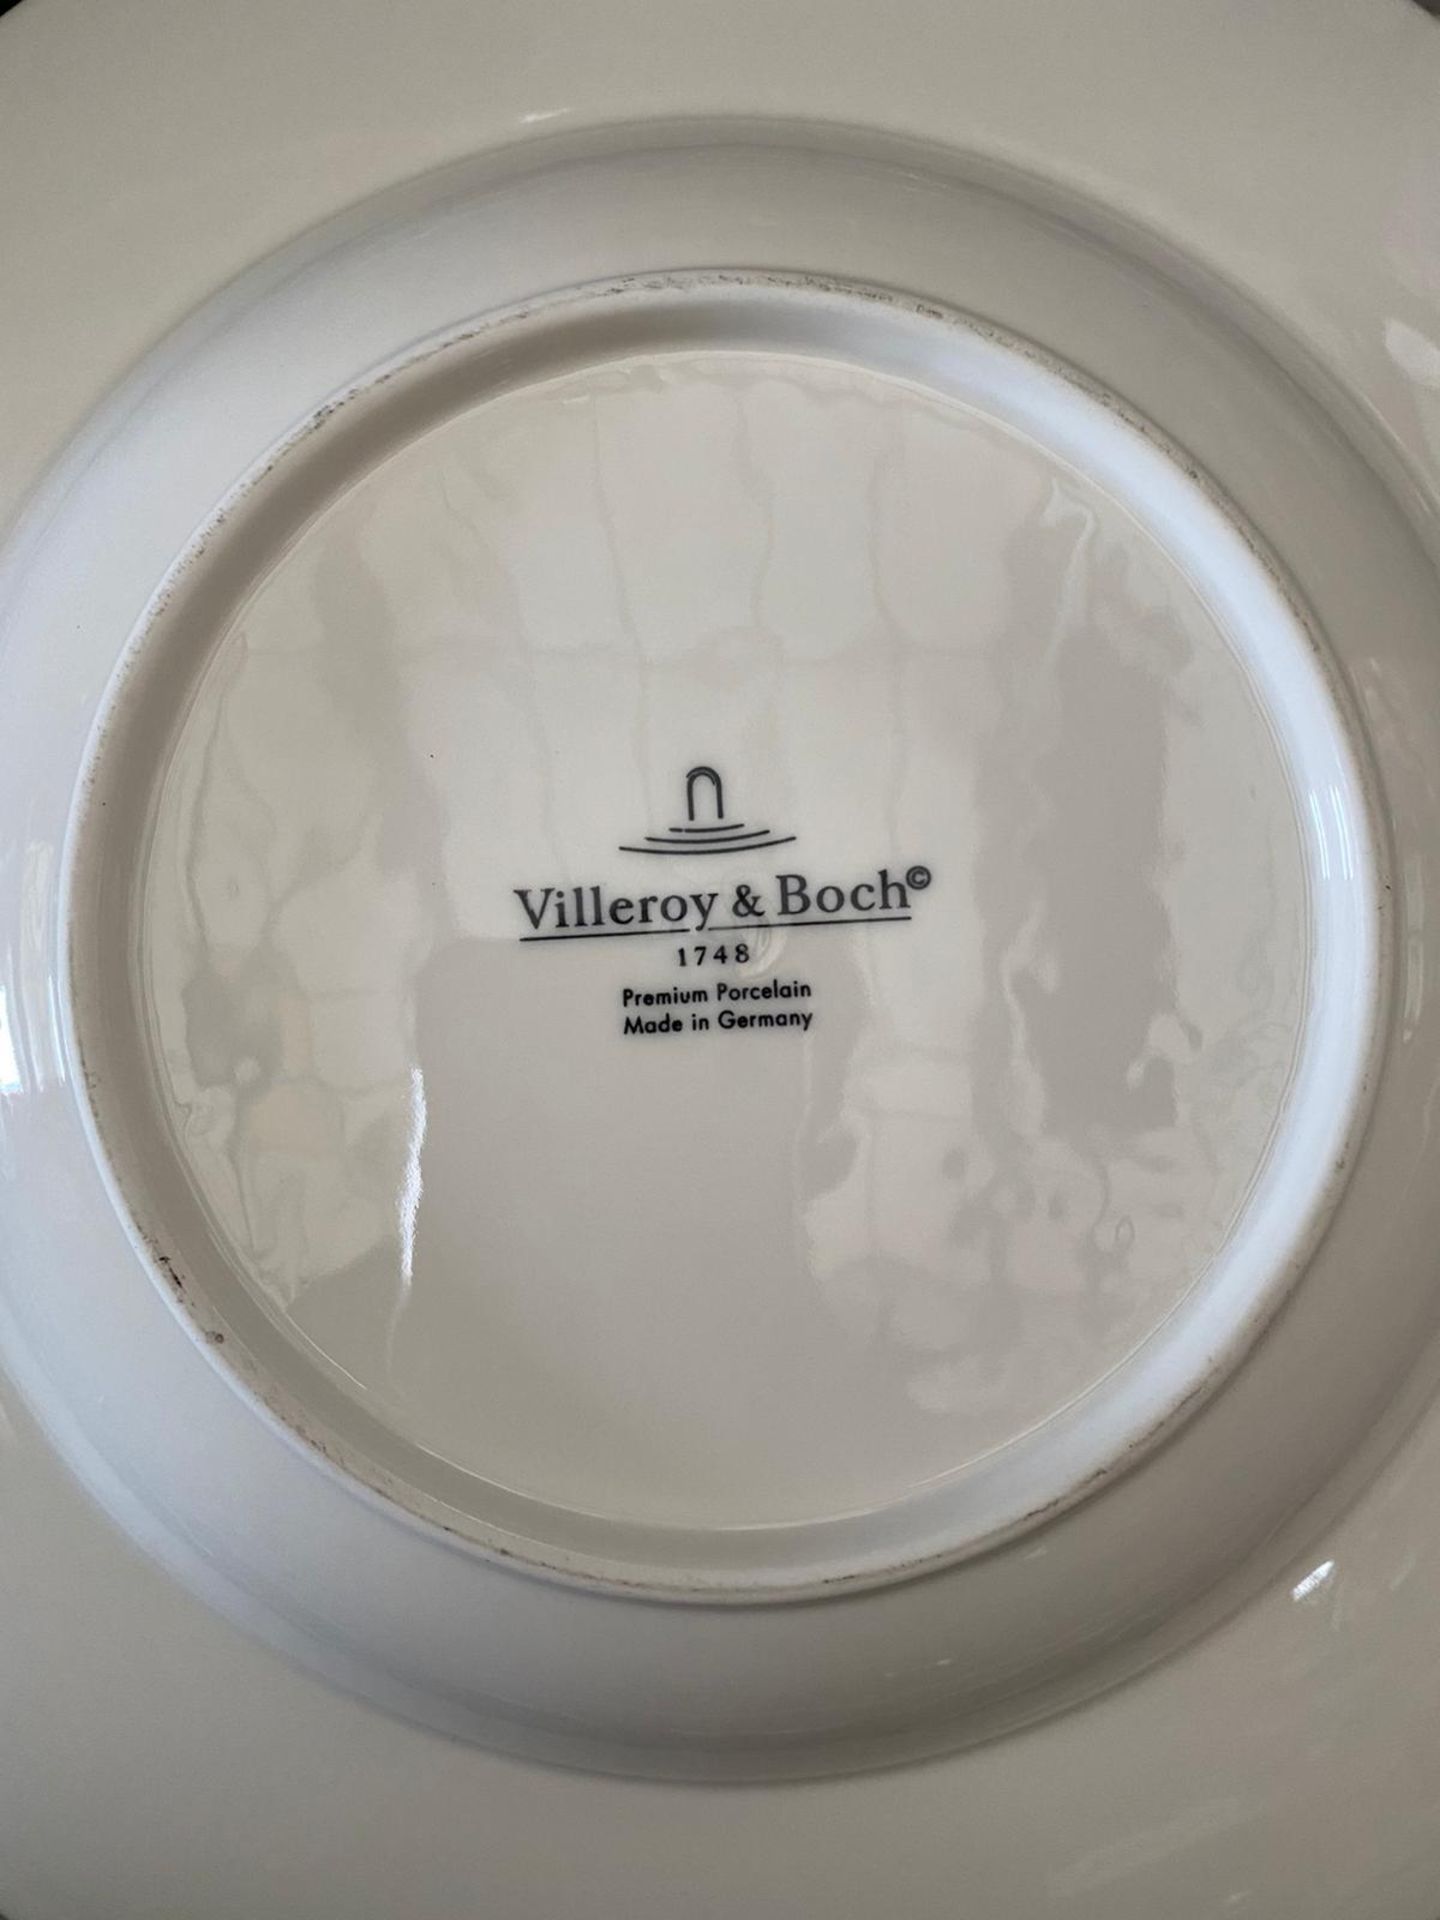 6 x Villeroy & Boch Royal Dinner Plate - 290mm - Ref: 1044122620 -New and Boxed Stock - RRP: £125.00 - Image 2 of 5